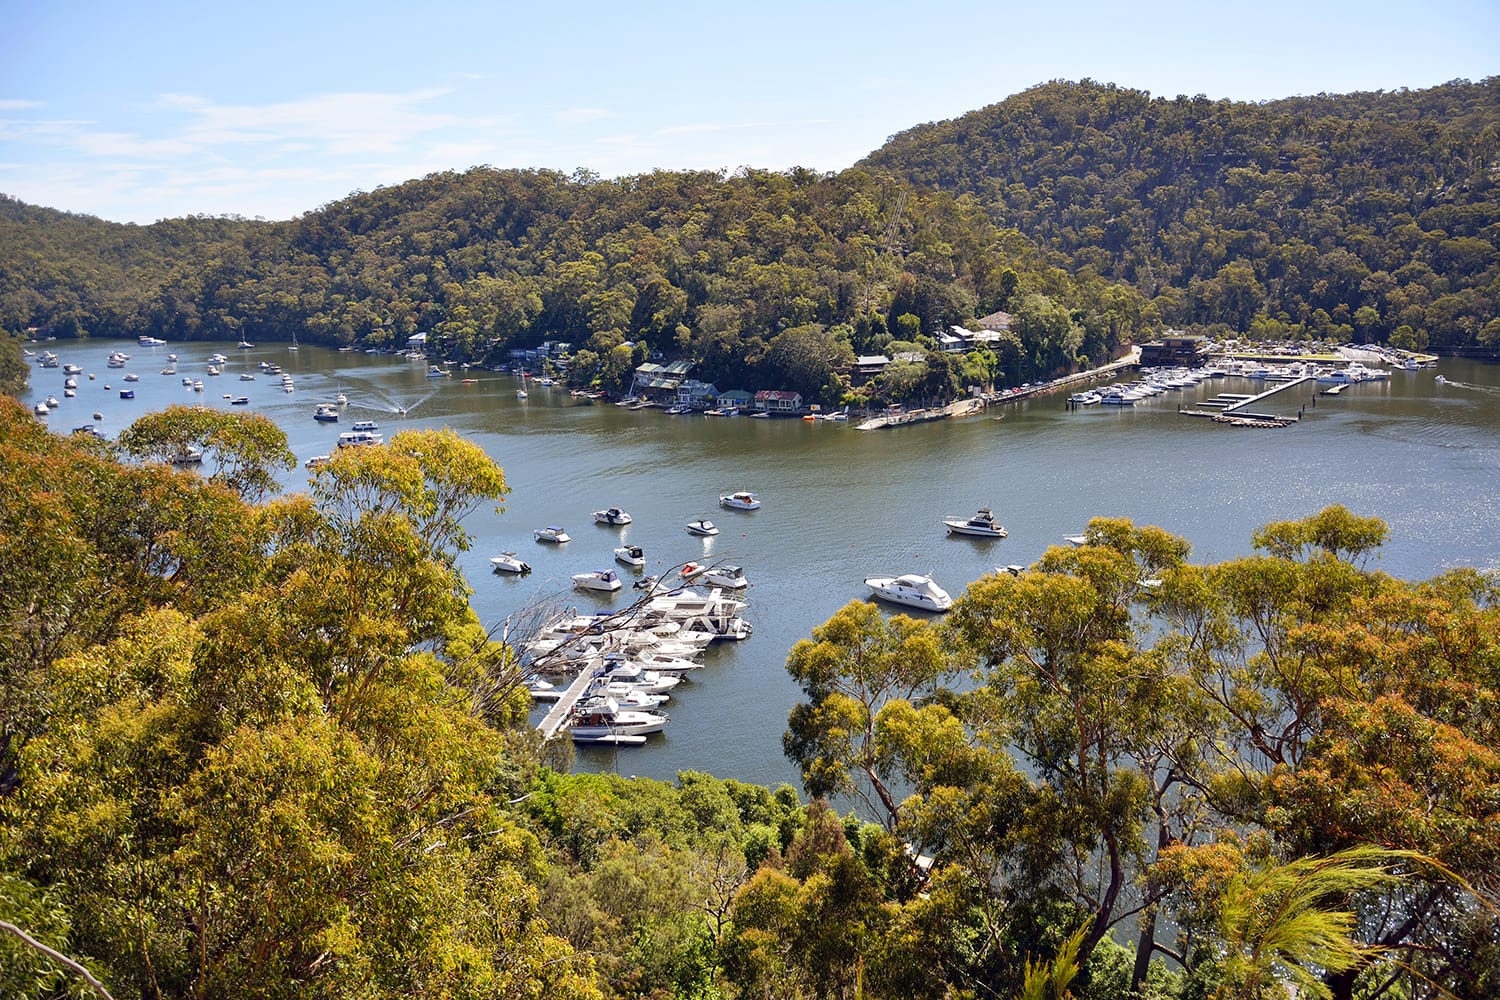 View over Berowra Waters village and Hawkesbury River in New South Wales, Australia.